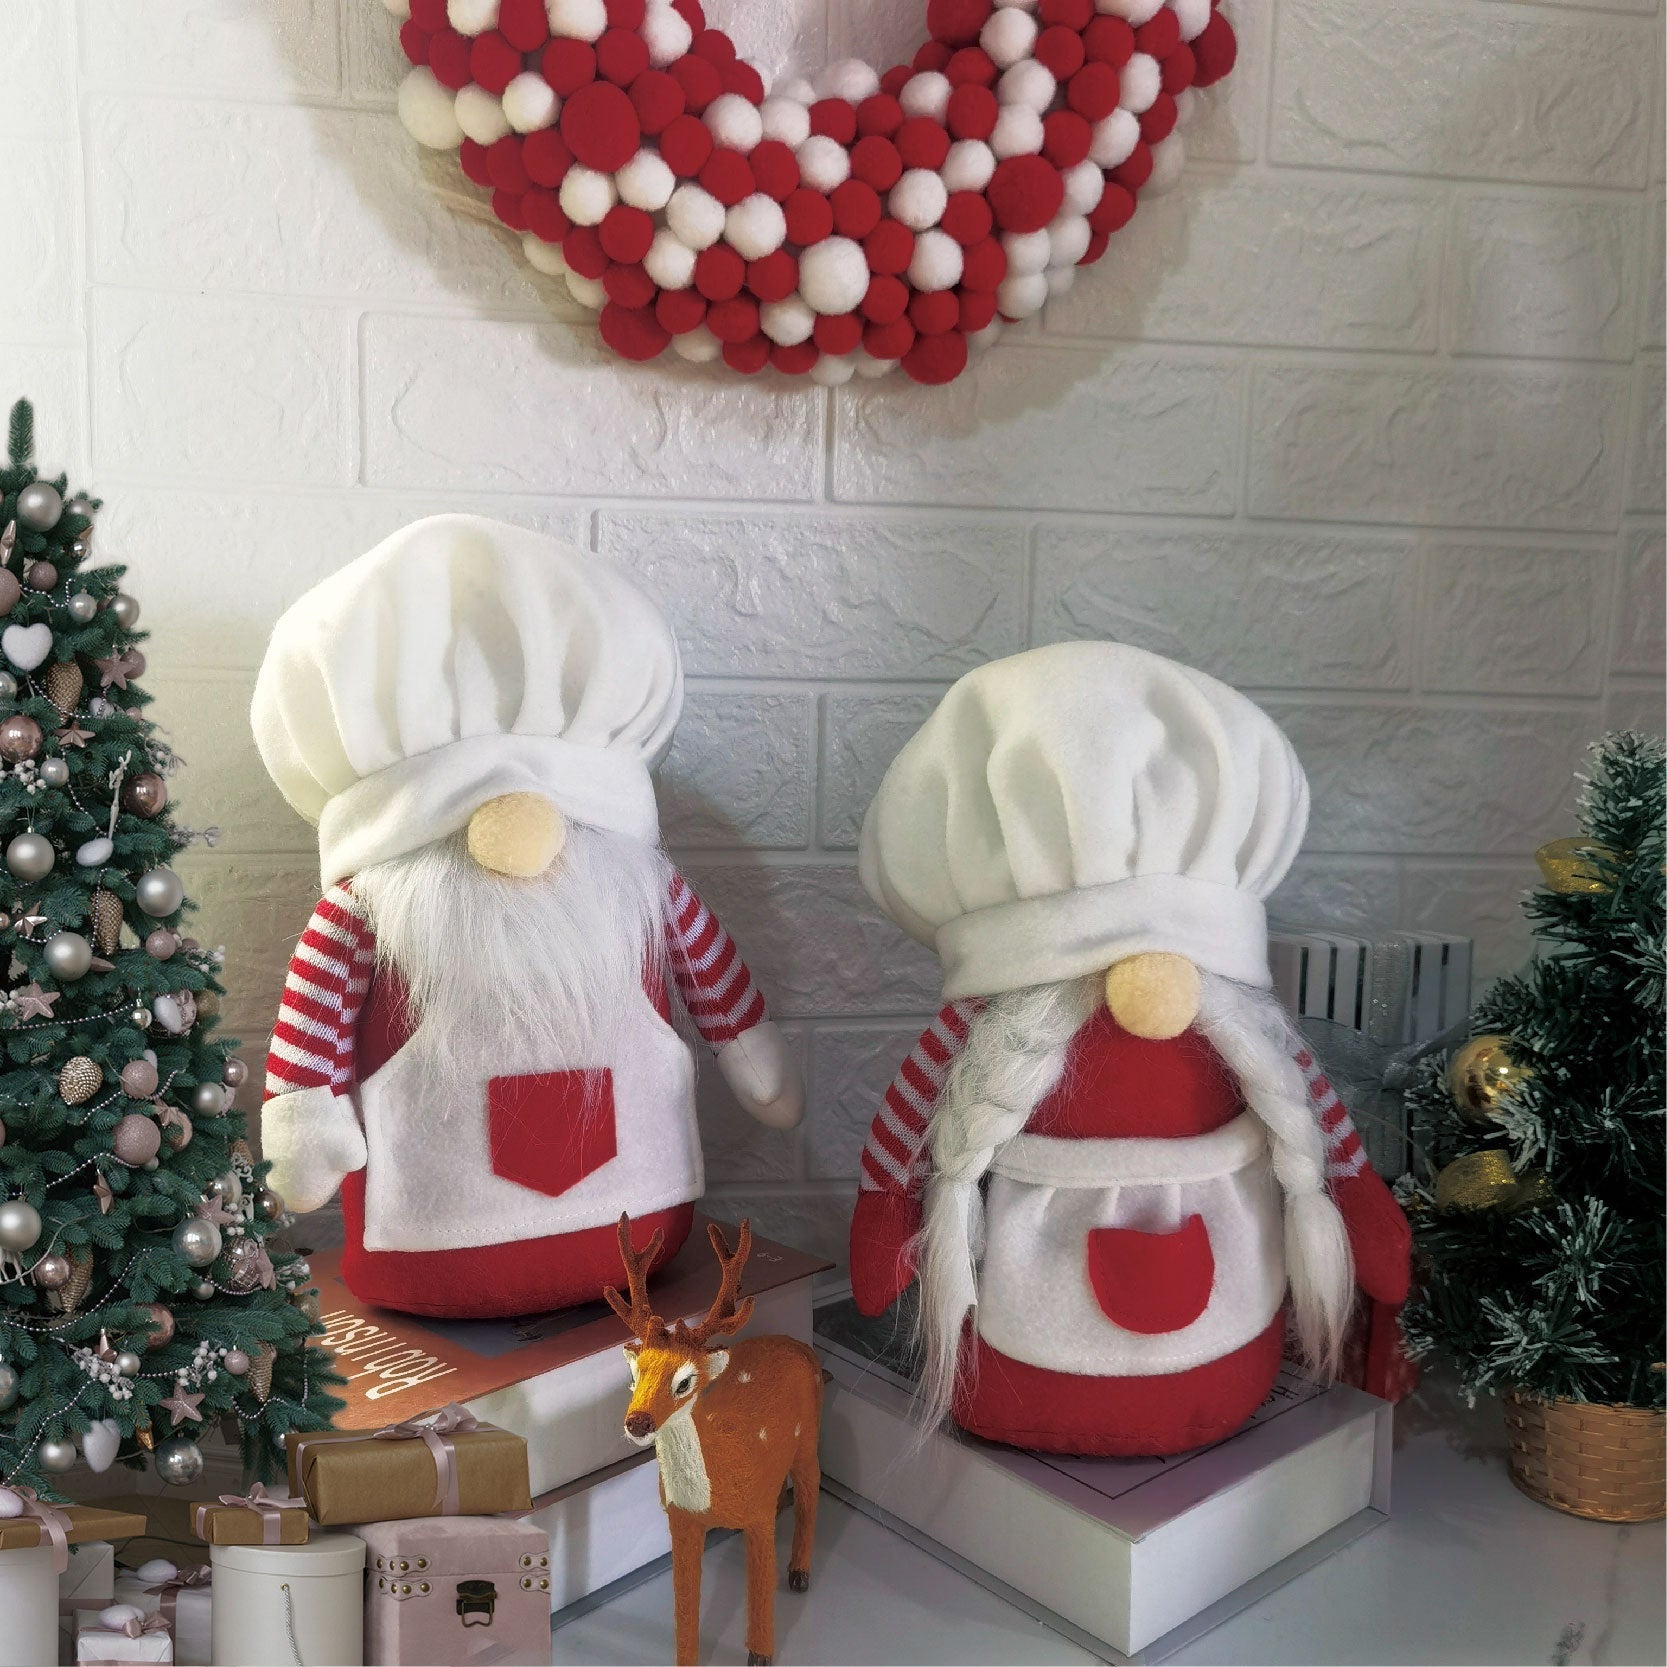 Red Knit Kitchen Chef Gnome – Tubby Tiger Gifts